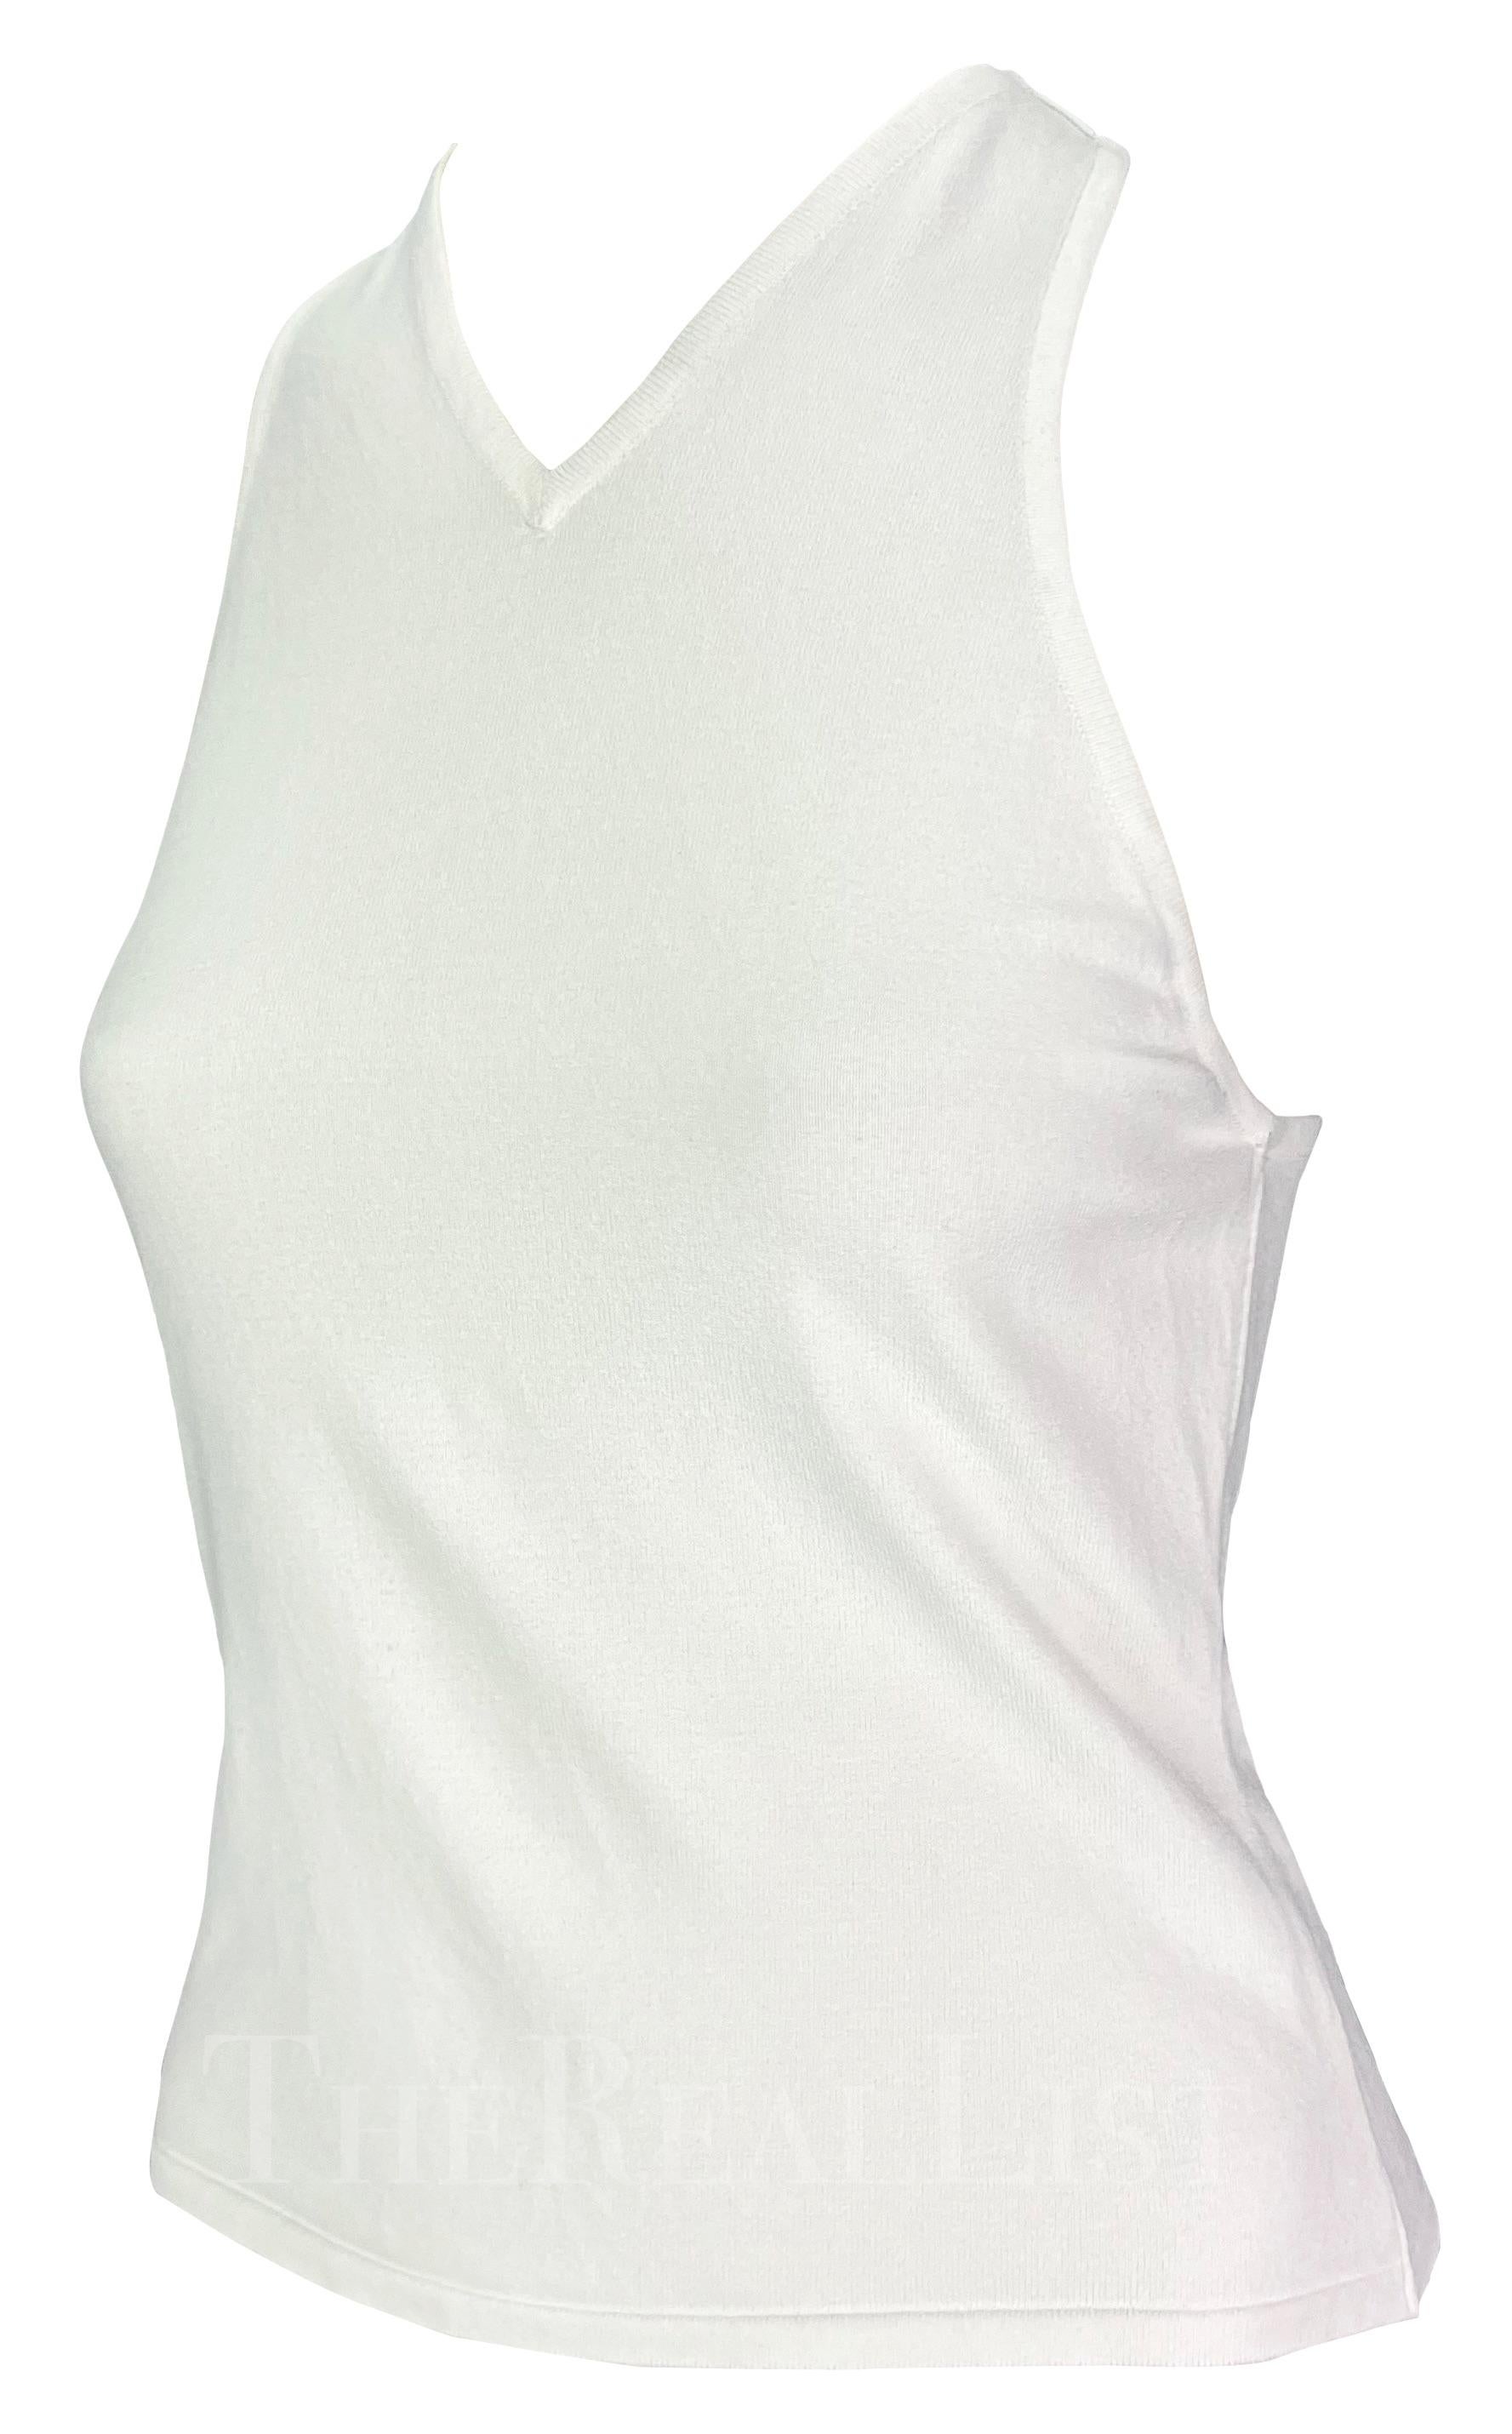 S/S 1998 Gucci by Tom Ford White Stretch Knit Racerback Tank Top For Sale 2